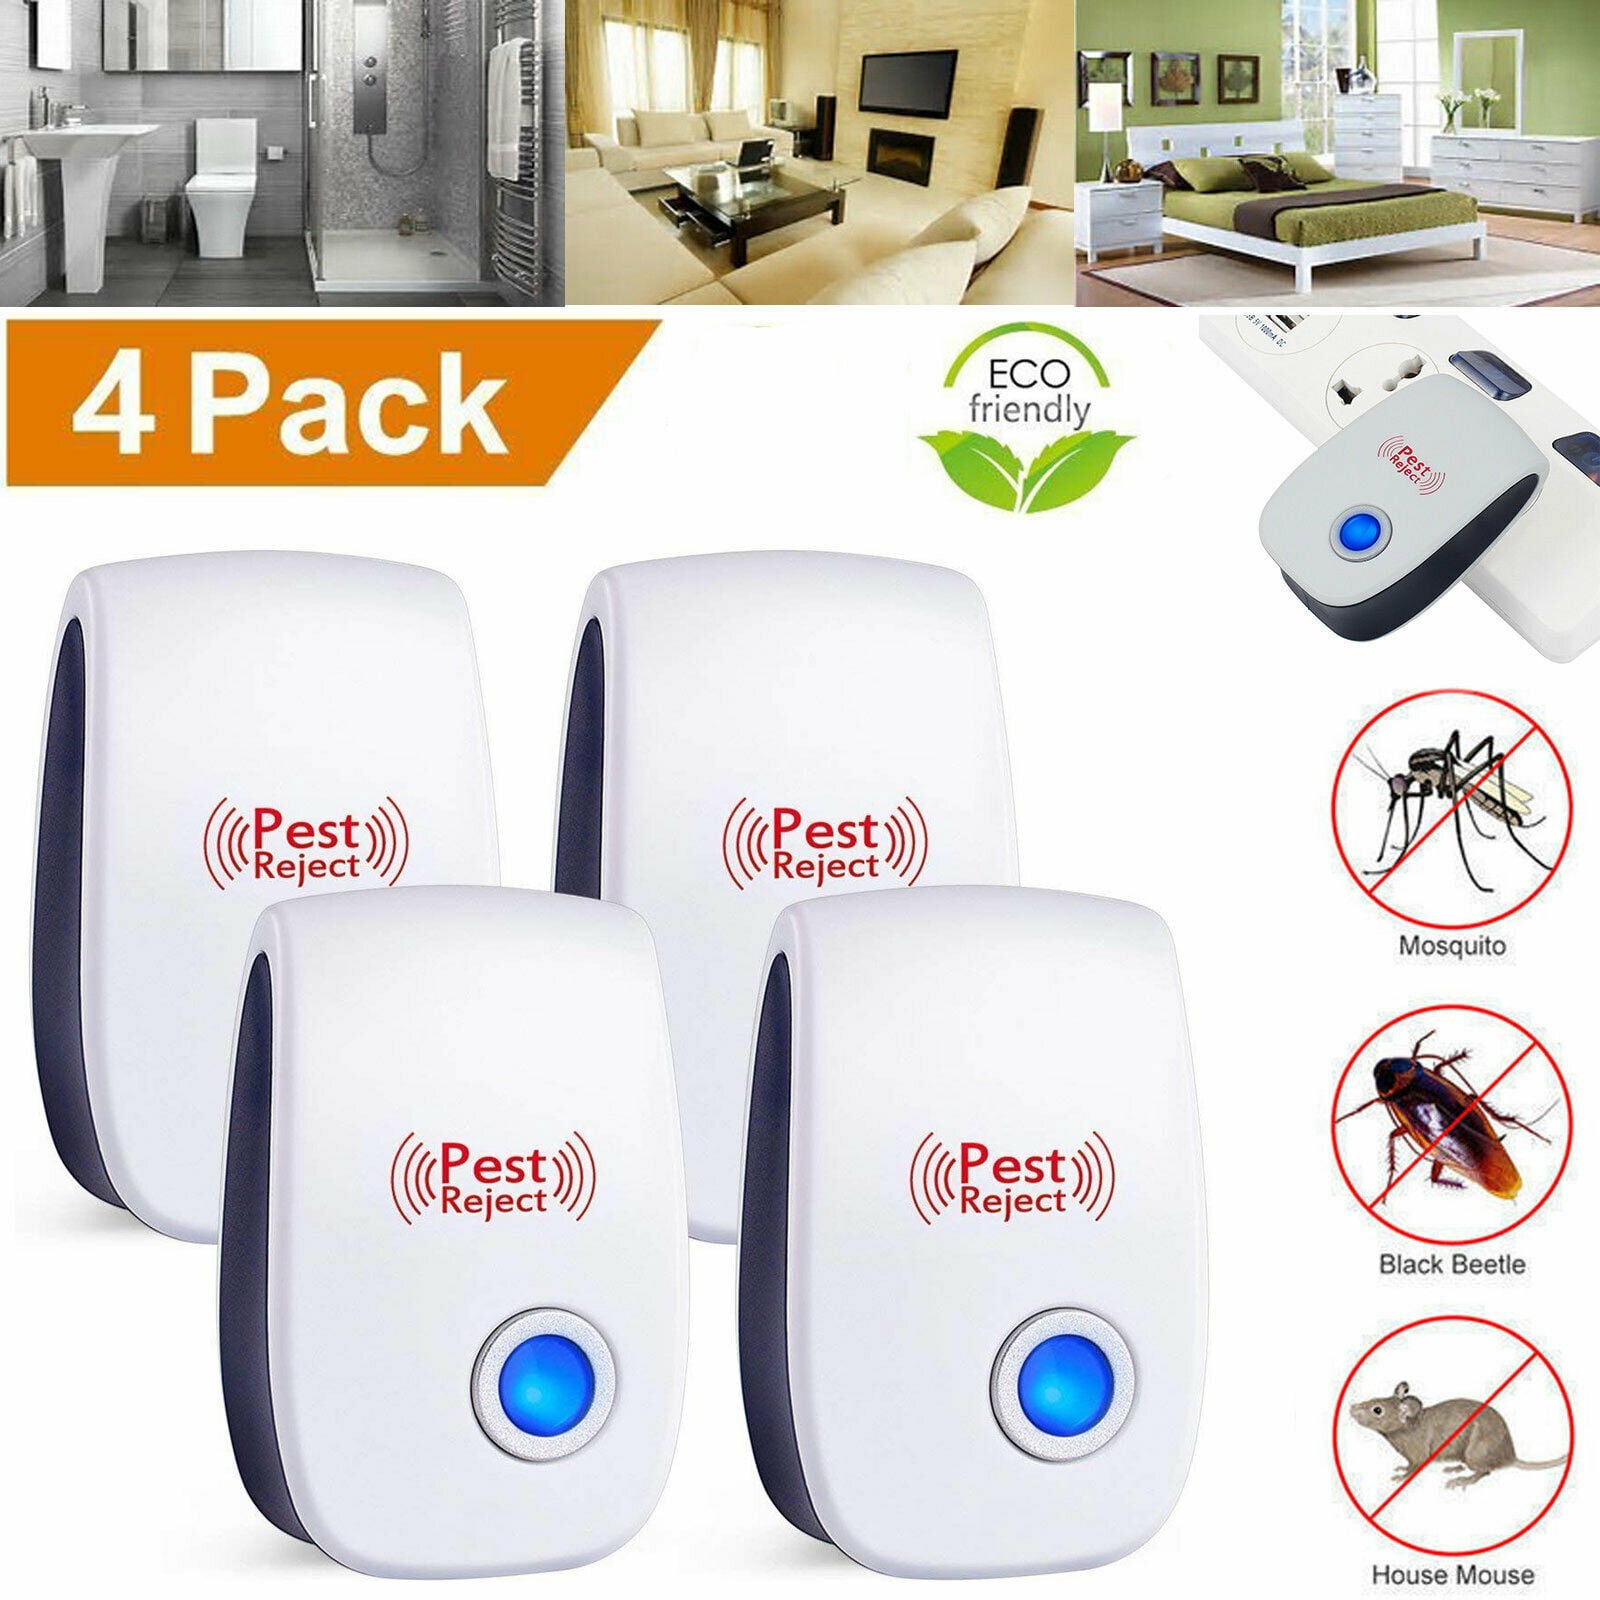 4 Pack Ultrasonic Pest Repeller Control Electronic Repellent Insect Mice Reject 